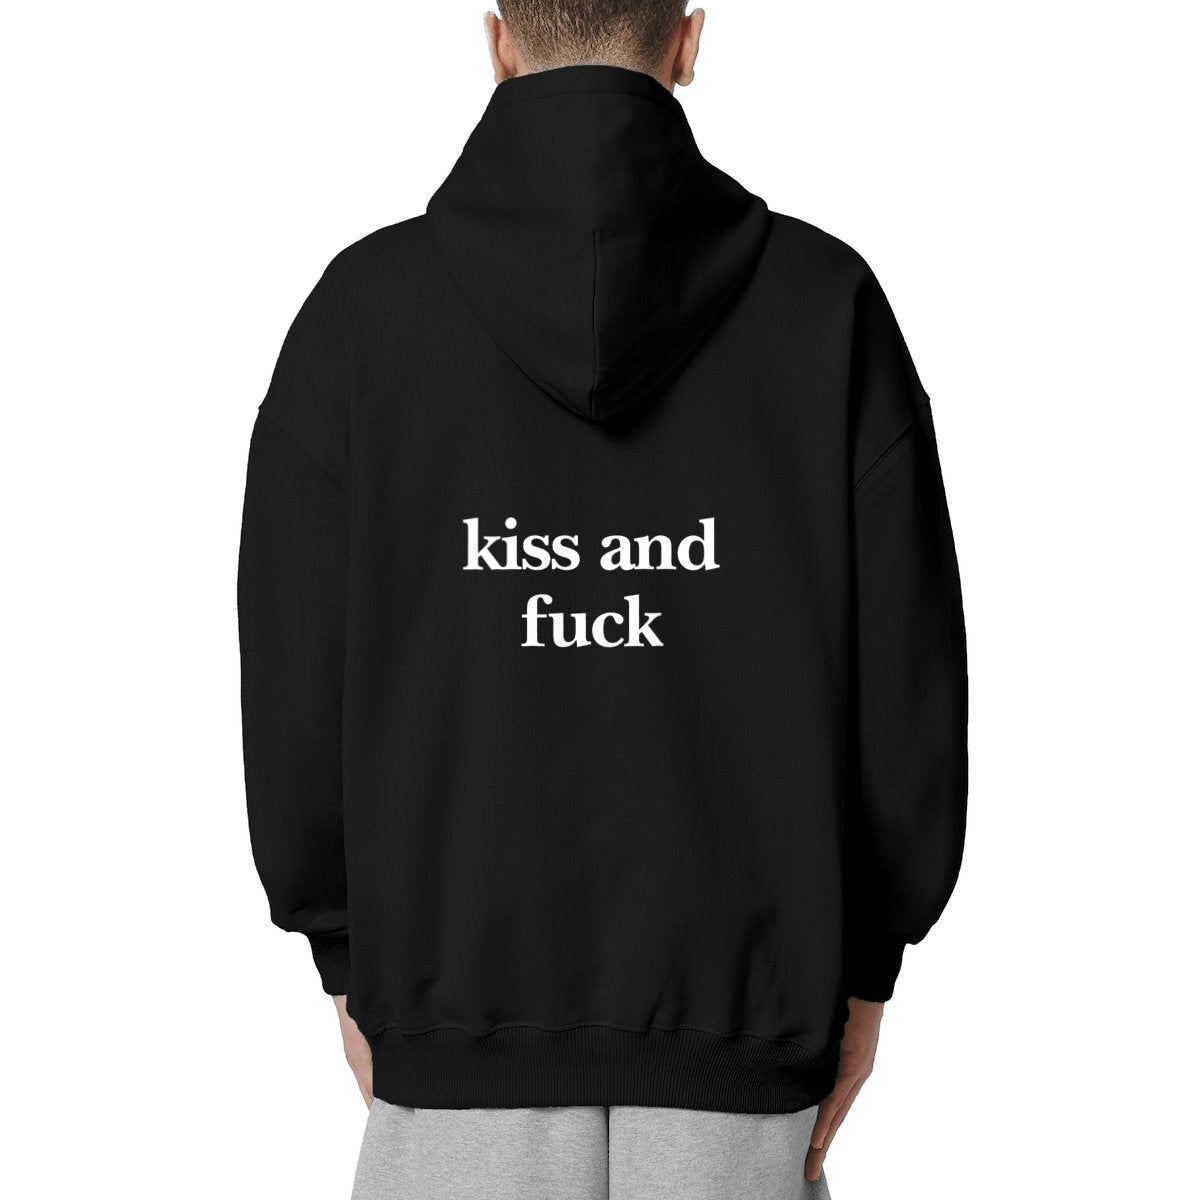 kiss and fuck hoodie.garçon garçon essentiel black oversized hoodie. Encapsulate effortless Parisian cool with this hoodie, its subtle 'kiss and fuck ON THE BACK' emblem whispering understated sophistication. Crafted for comfort, styled for streets of Paris.